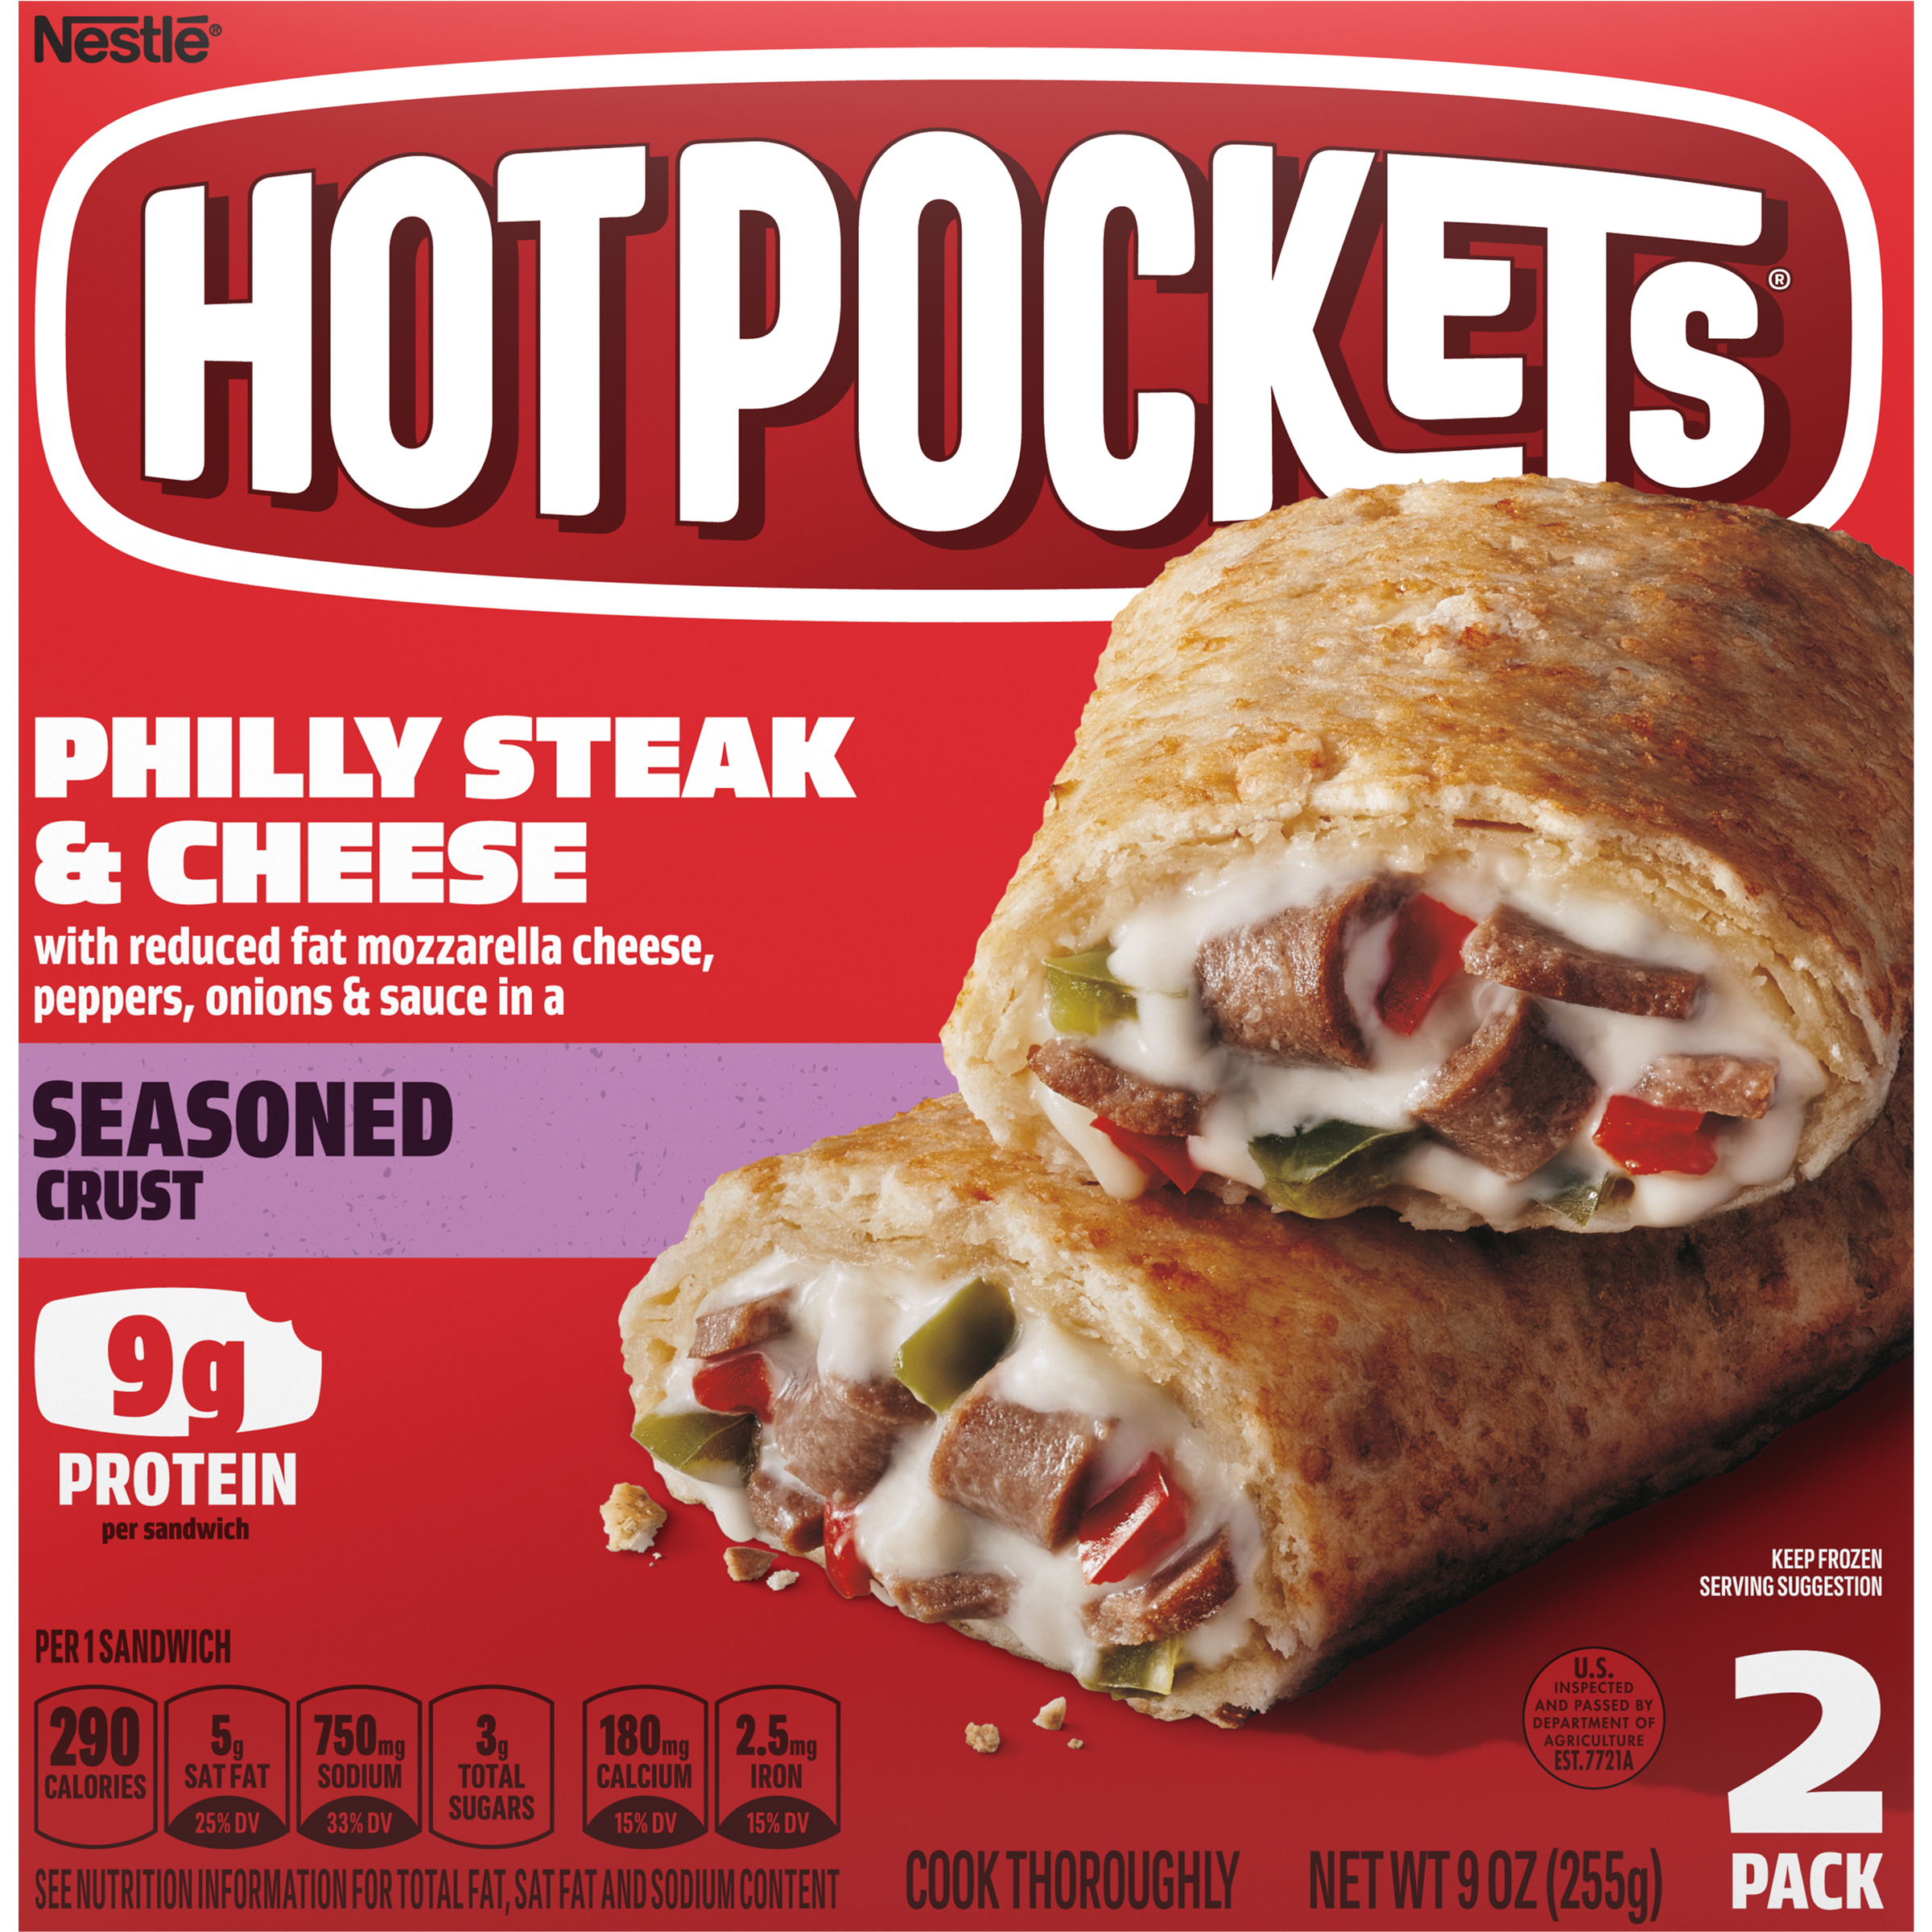 HOT POCKETS Seasoned Crust Philly Steak and Cheese (2 Pack) 8 units per case 9.0 oz